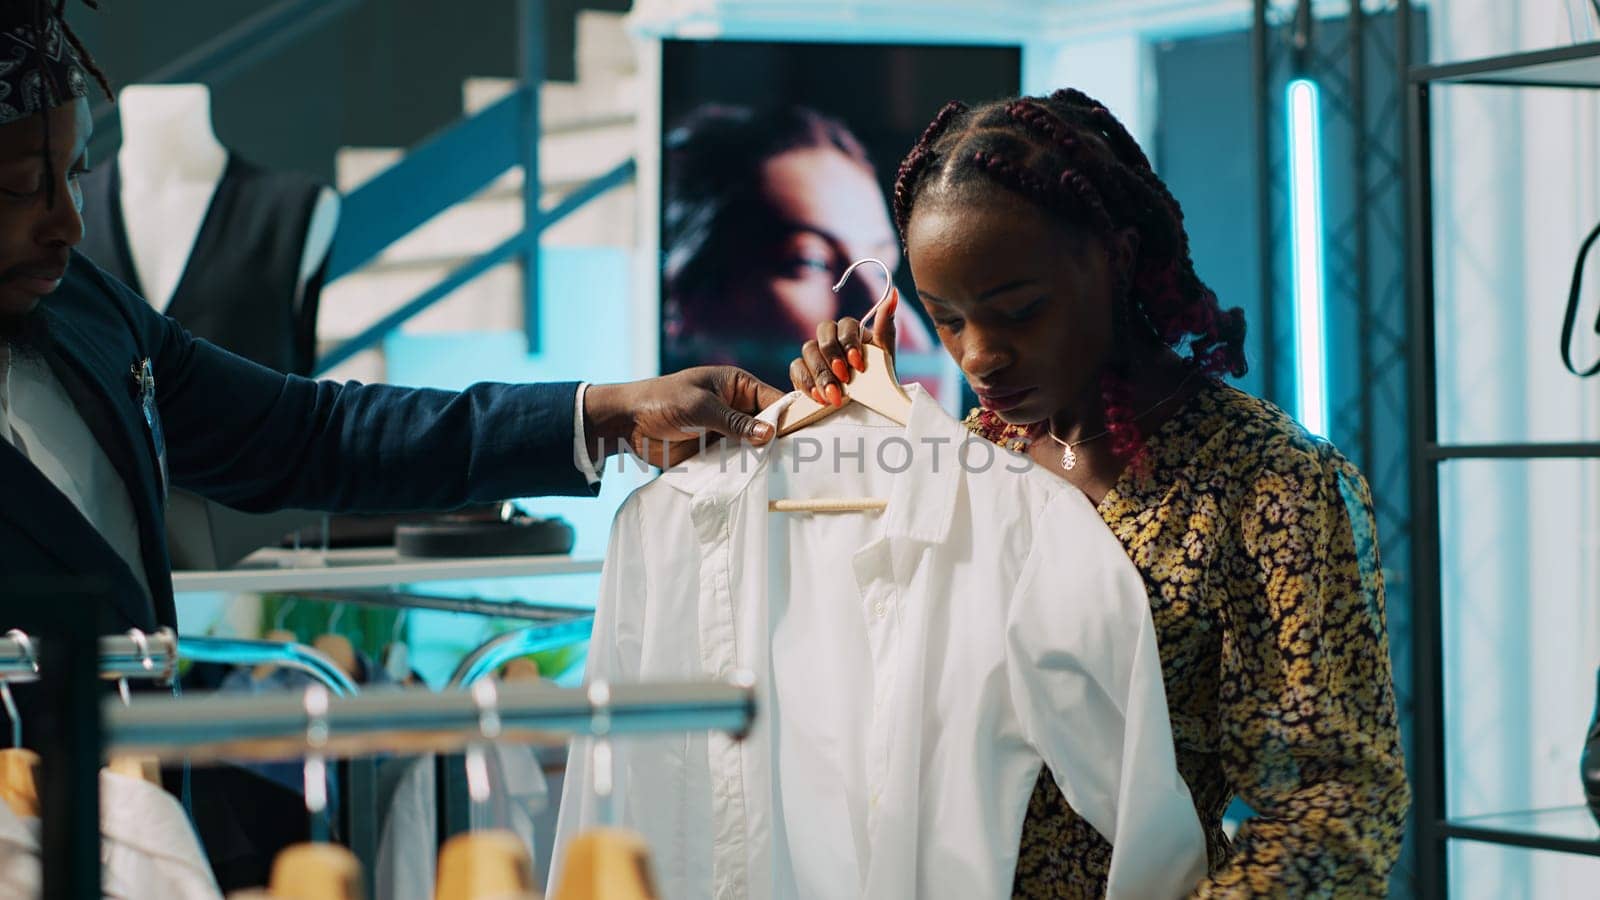 African american shopper looking for pregnancy clothing items, shopping session at department store. Employee offering suggestions for pregnant client, trendy designer brands. Camera A.